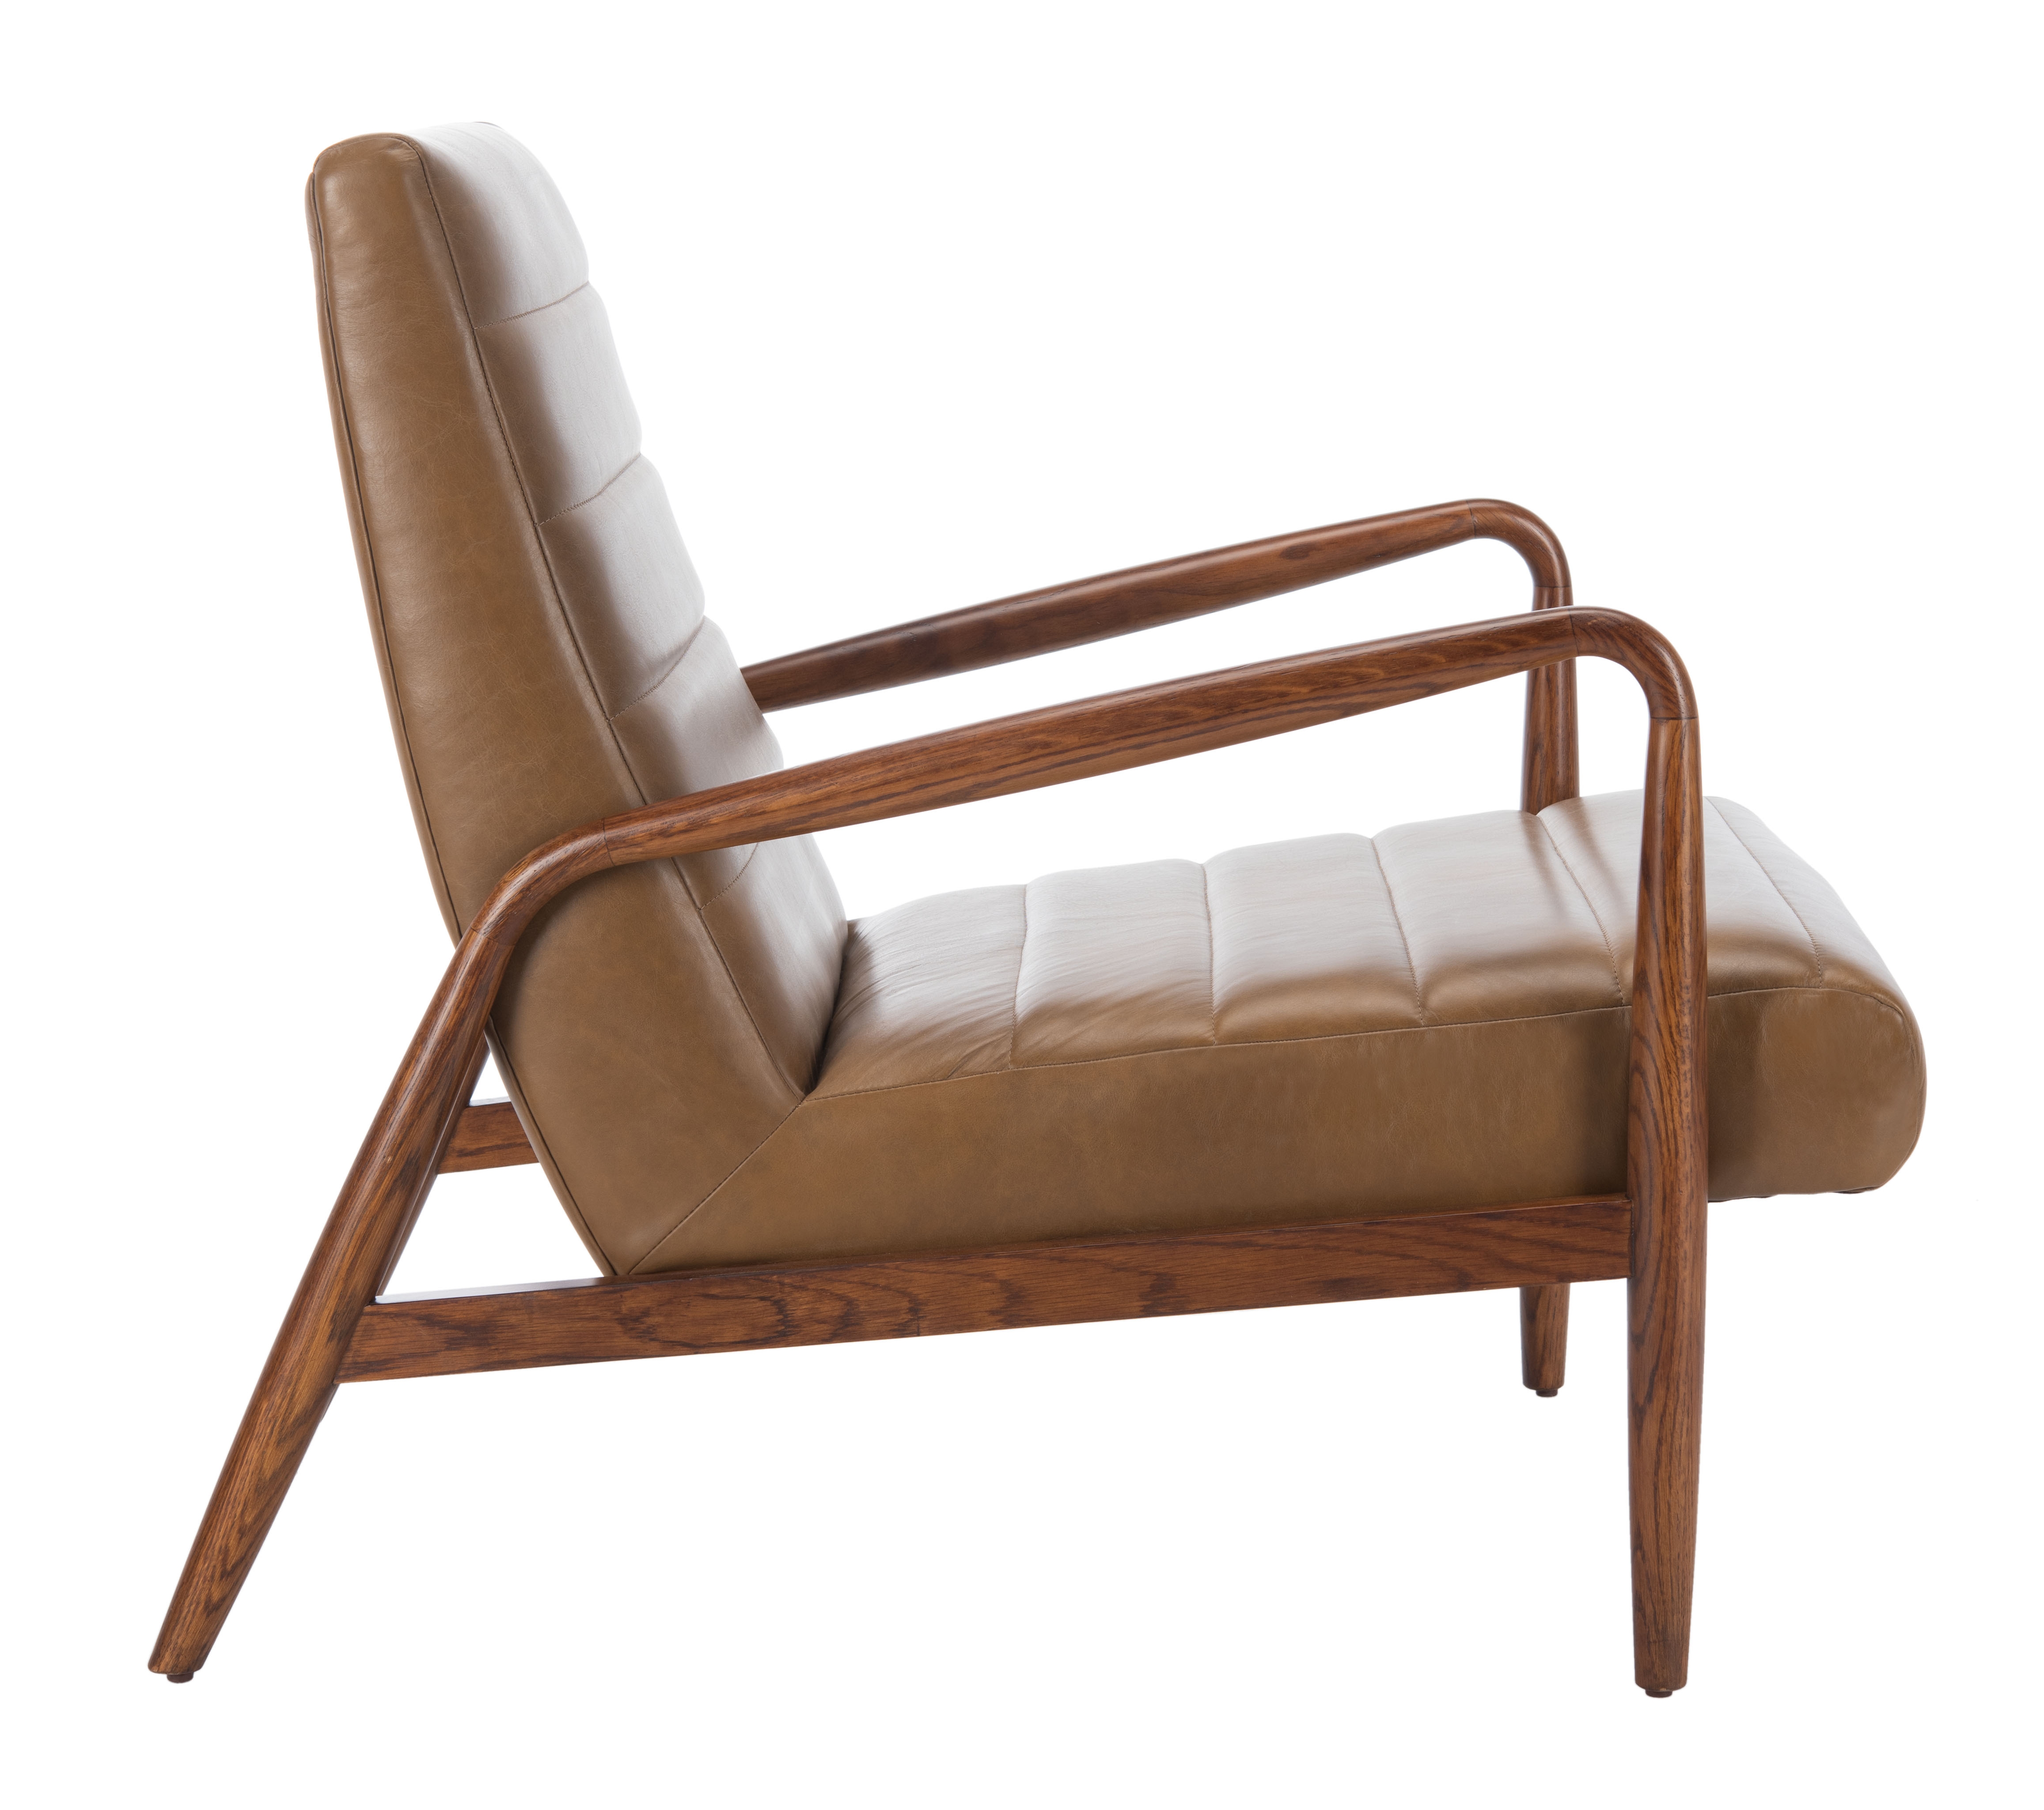 Willow Channel Tufted Arm Chair - Gingerbread/Dark Walnut  - Arlo Home - Image 2